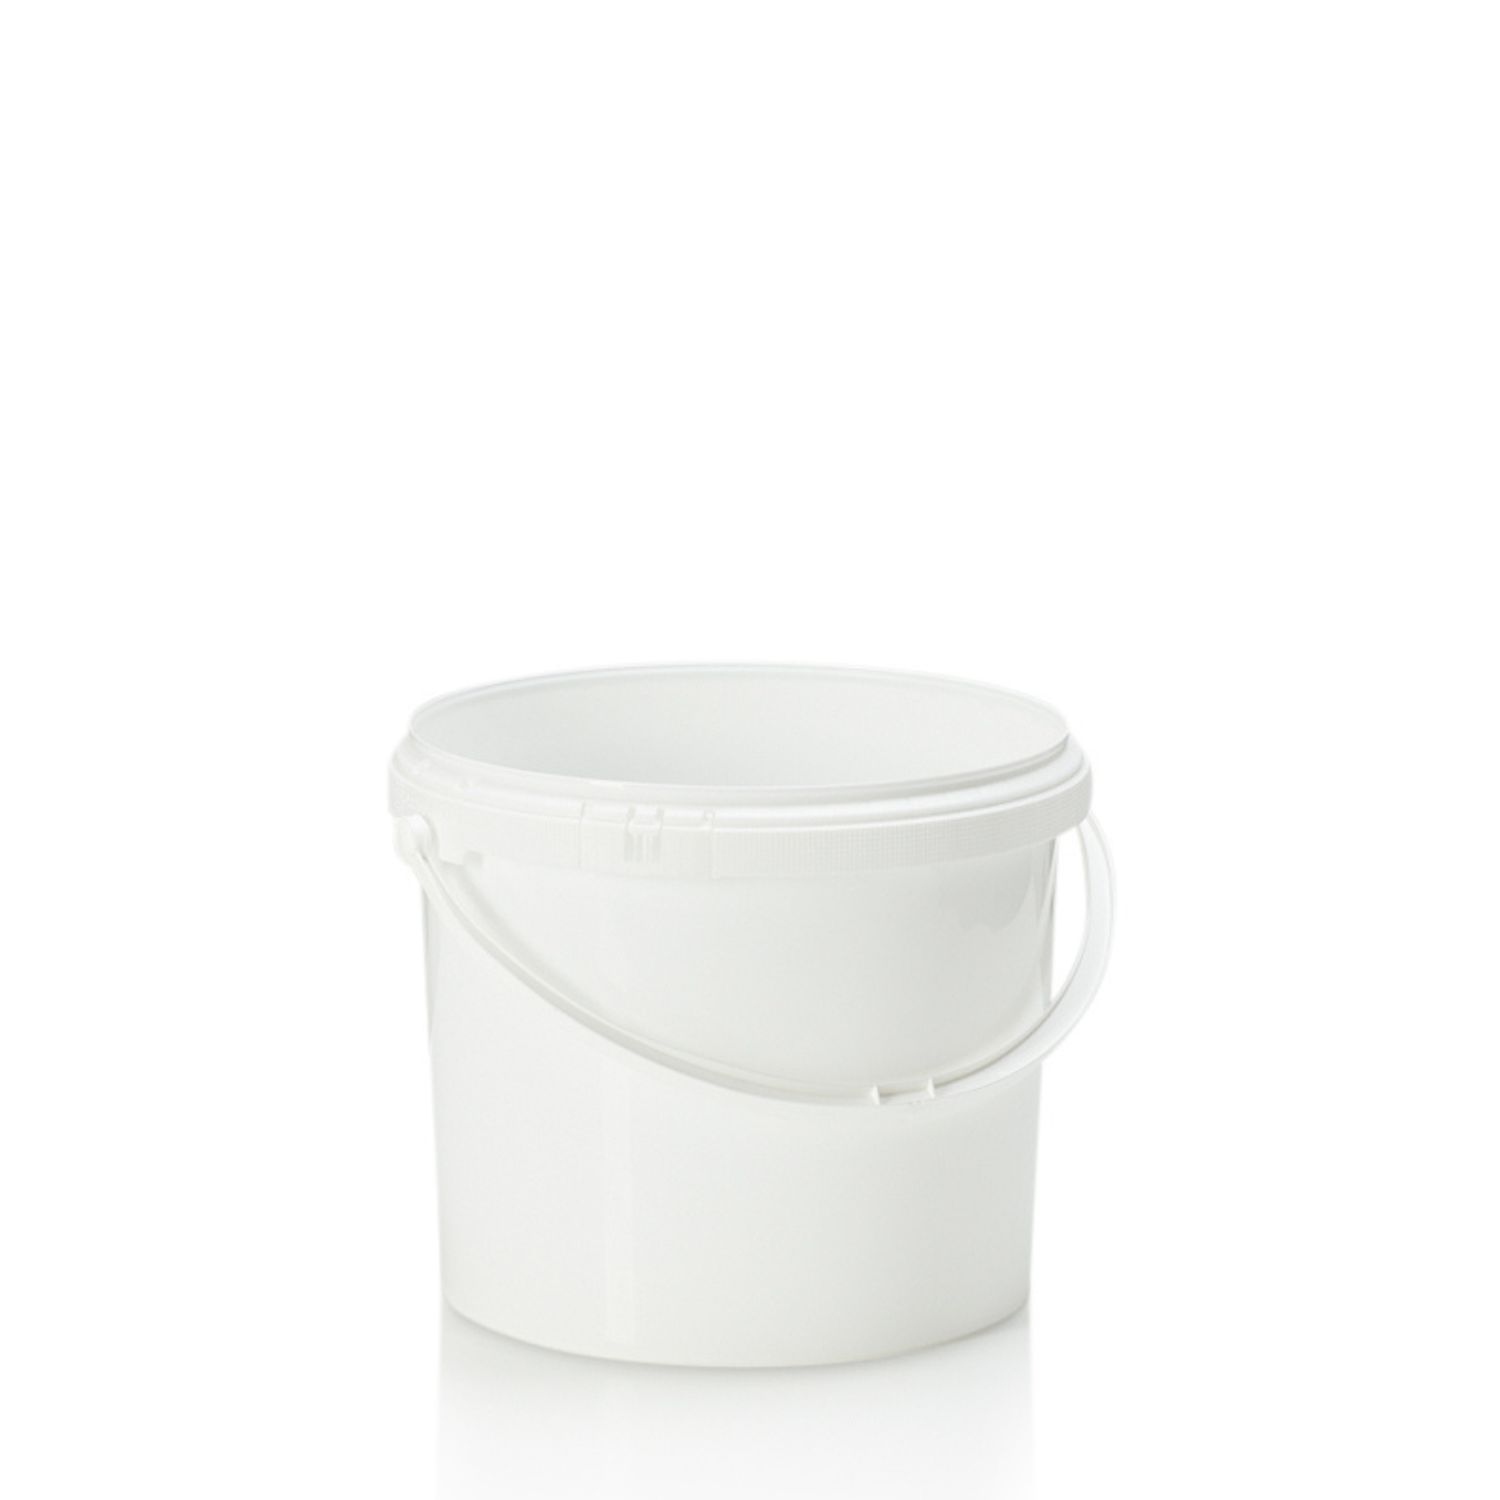 8.6ltr White PP Tamper Evident Pail with Plastic Handle